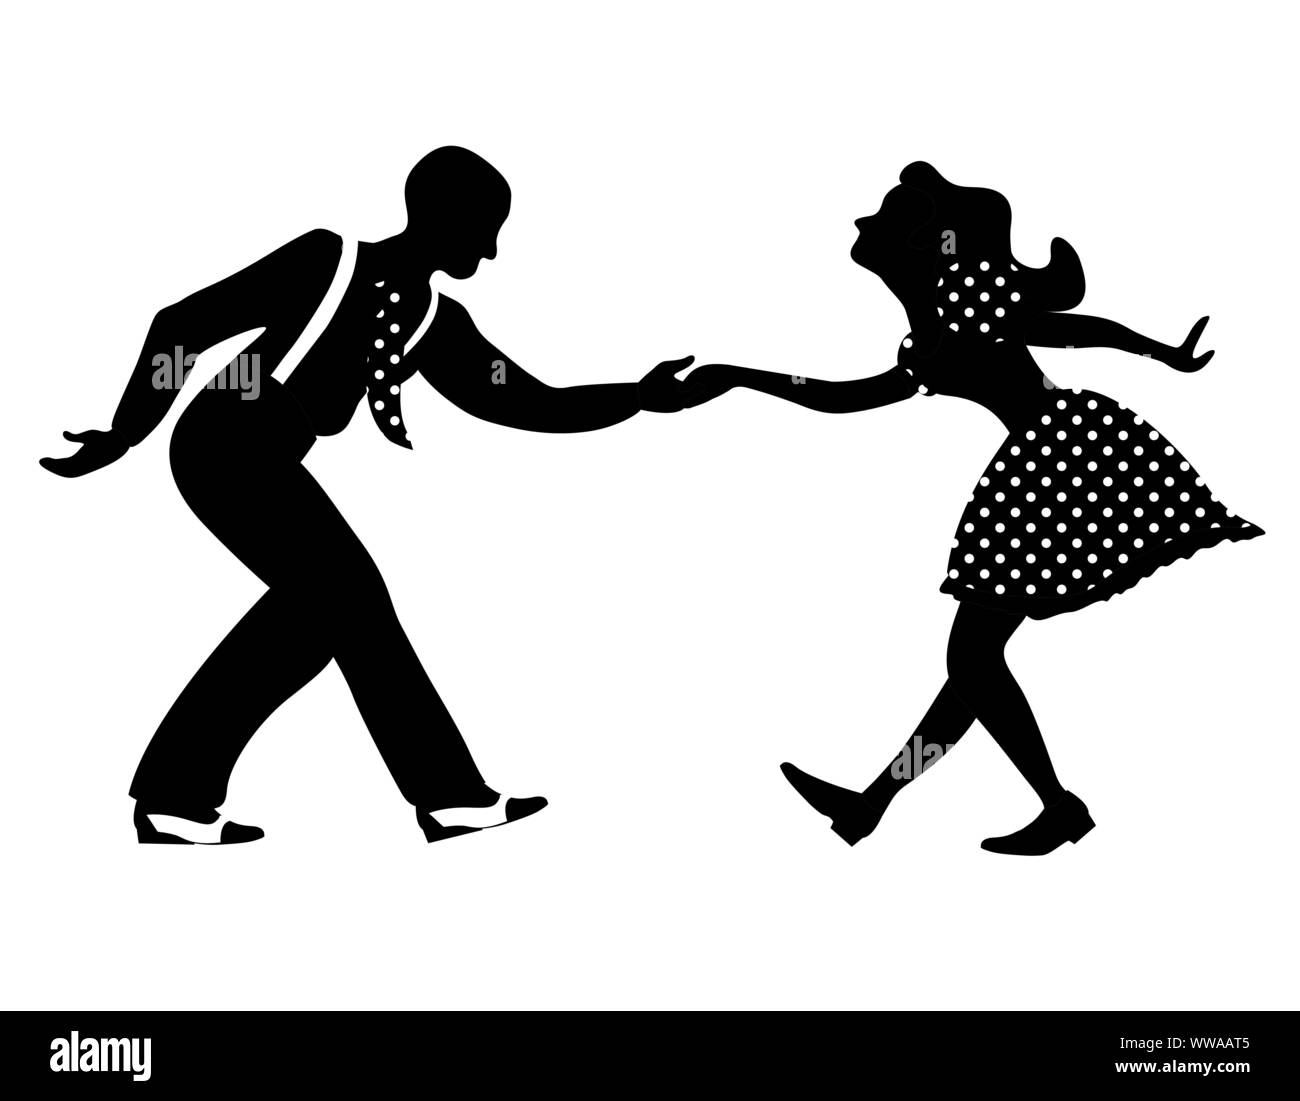 Swing Dance High Resolution Stock Photography and Images - Alamy